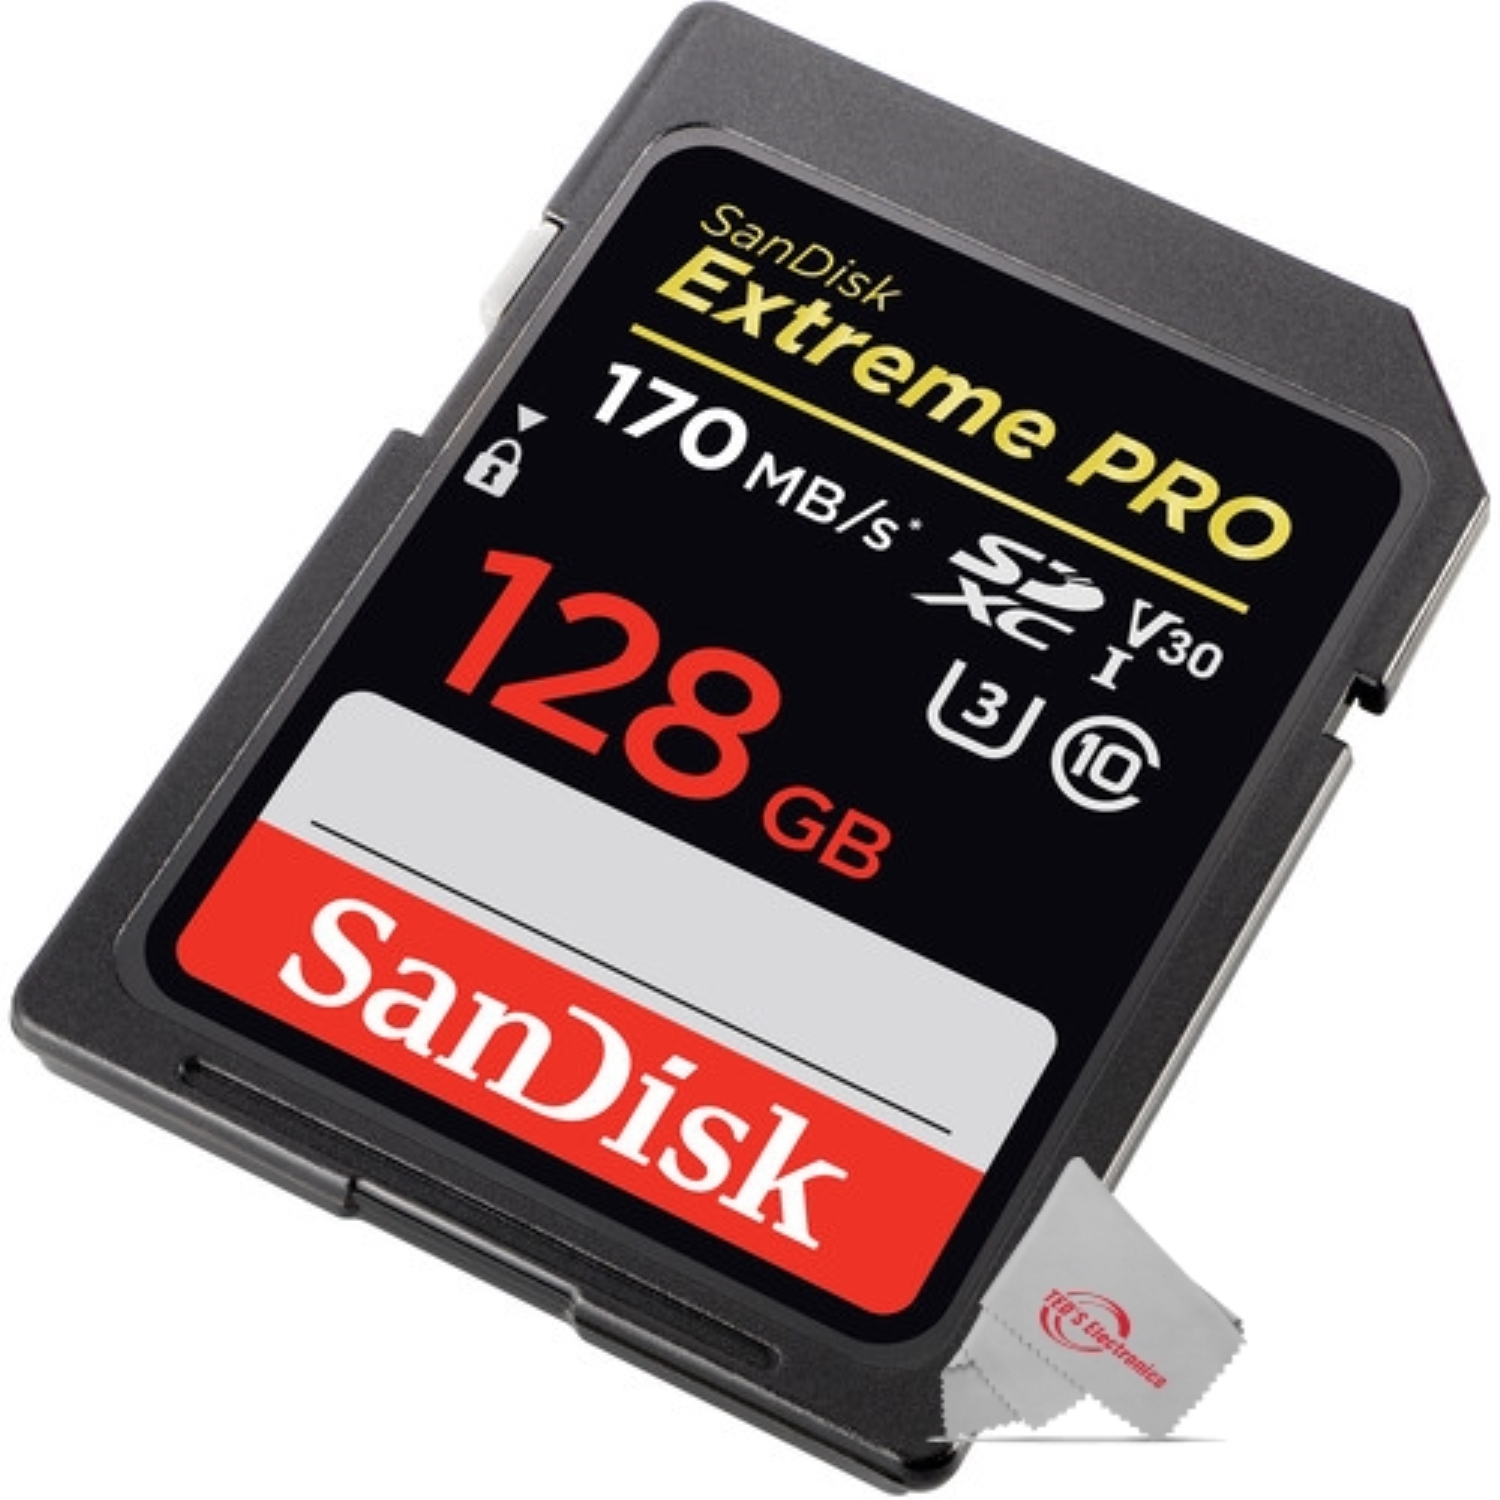 5x SanDisk Extreme Pro 128GB SDXC UHS-I/U3 V30 Class 10 Memory Card, Speed Up to 170MB/s (SDSDXXY-128G-GN4IN) - image 2 of 3